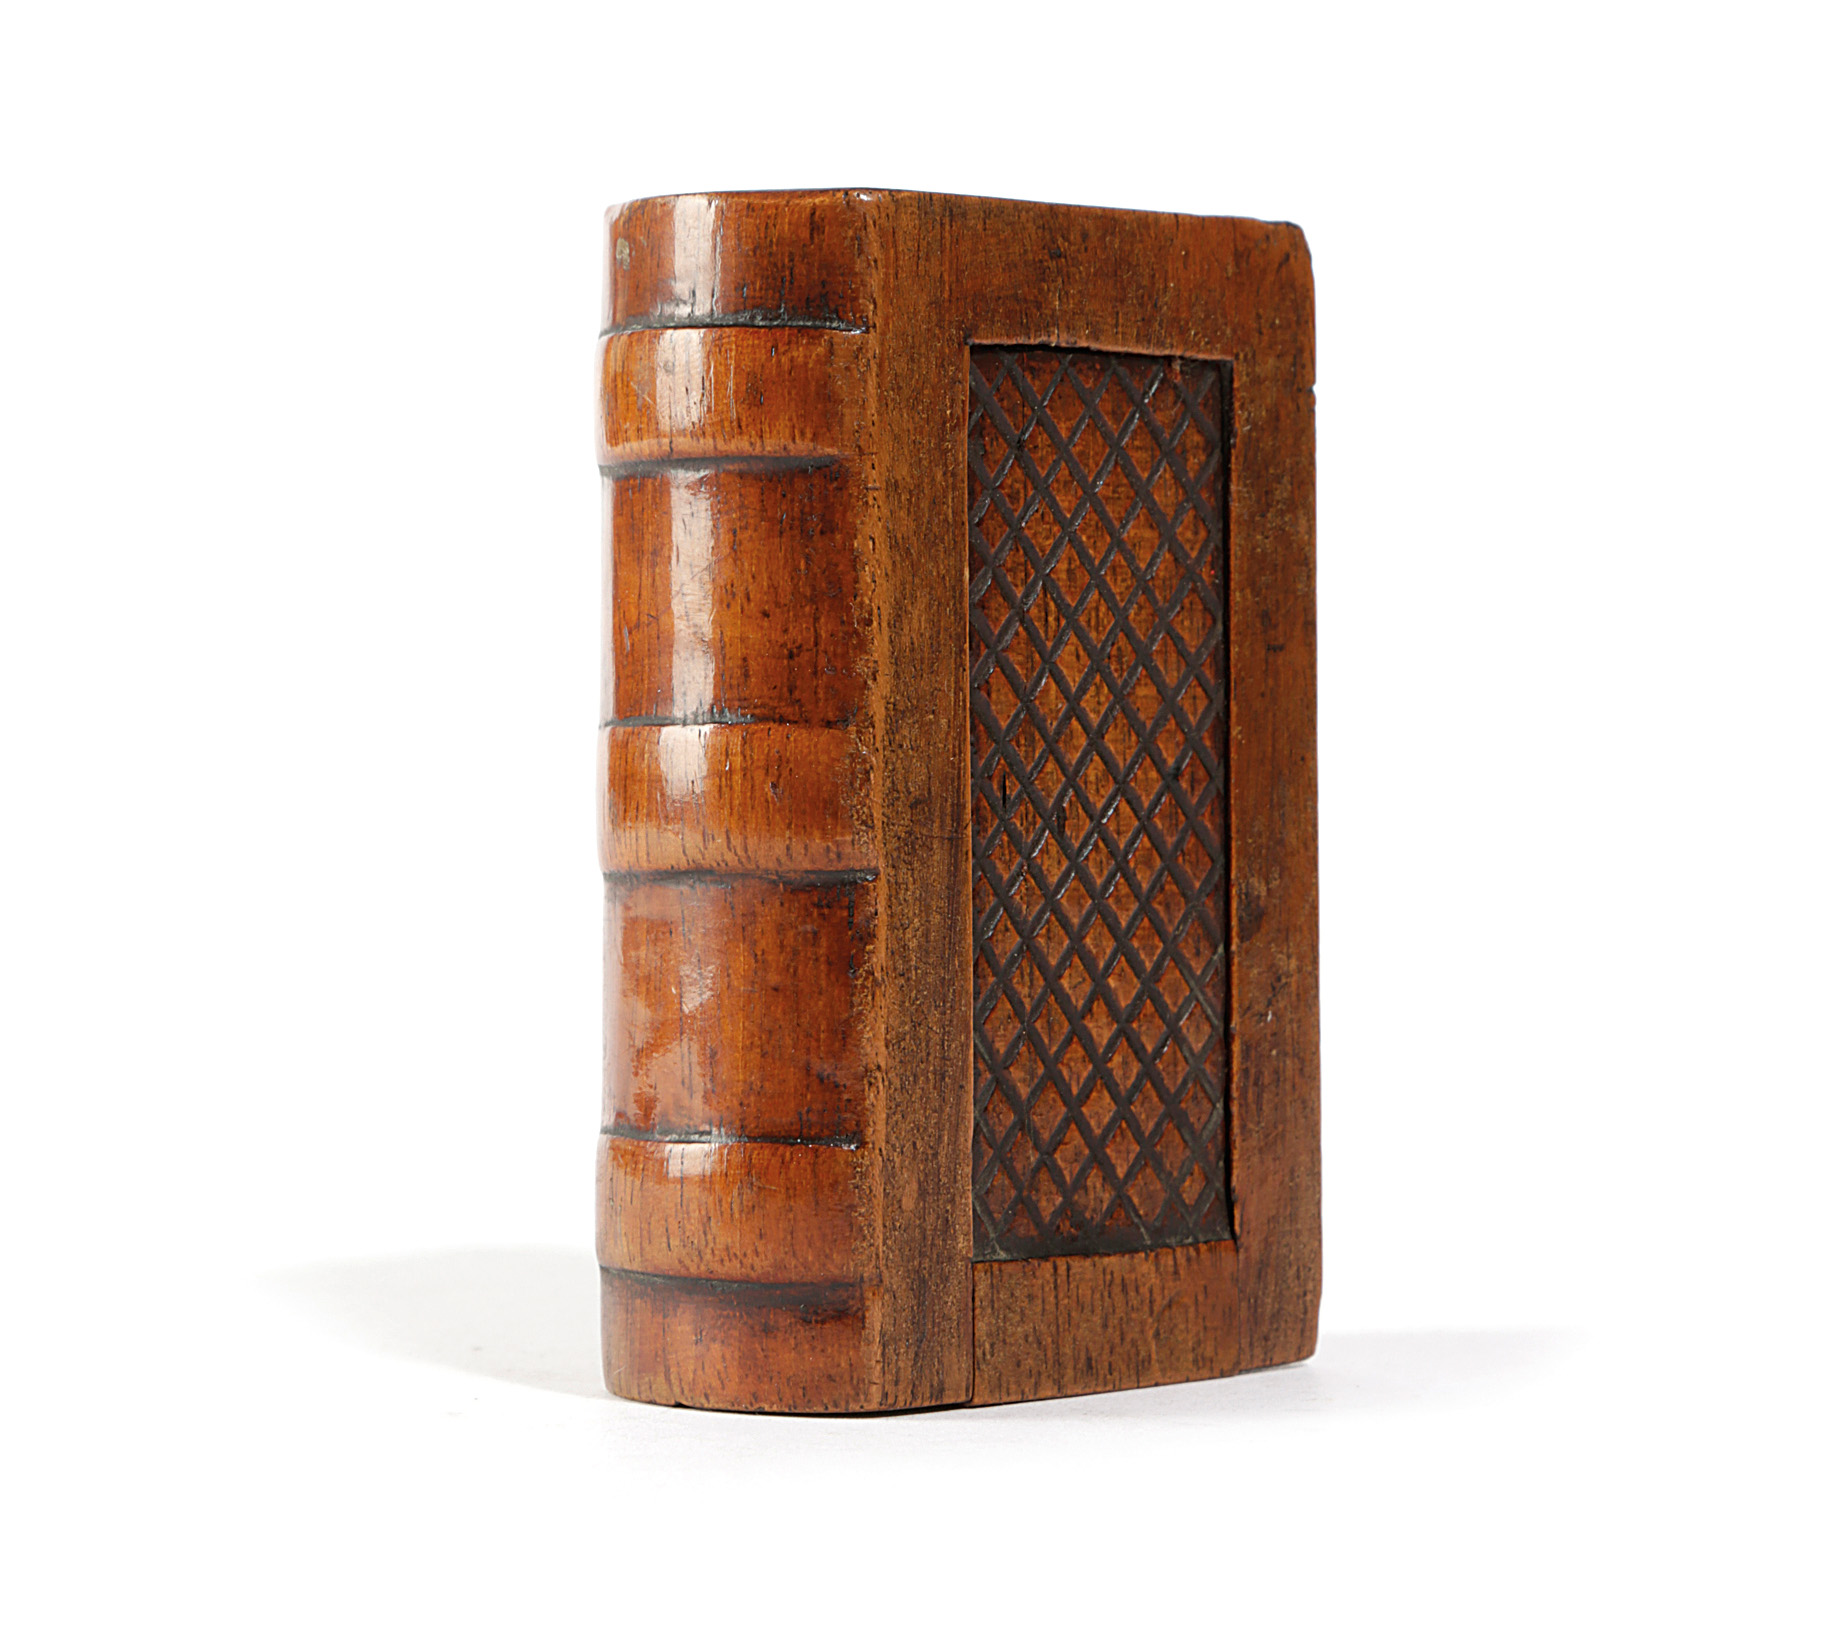 A VICTORIAN MAHOGANY SNUFF BOX IN THE FORM OF A BOOK MID-19TH CENTURY with a sliding cover 9cm wide